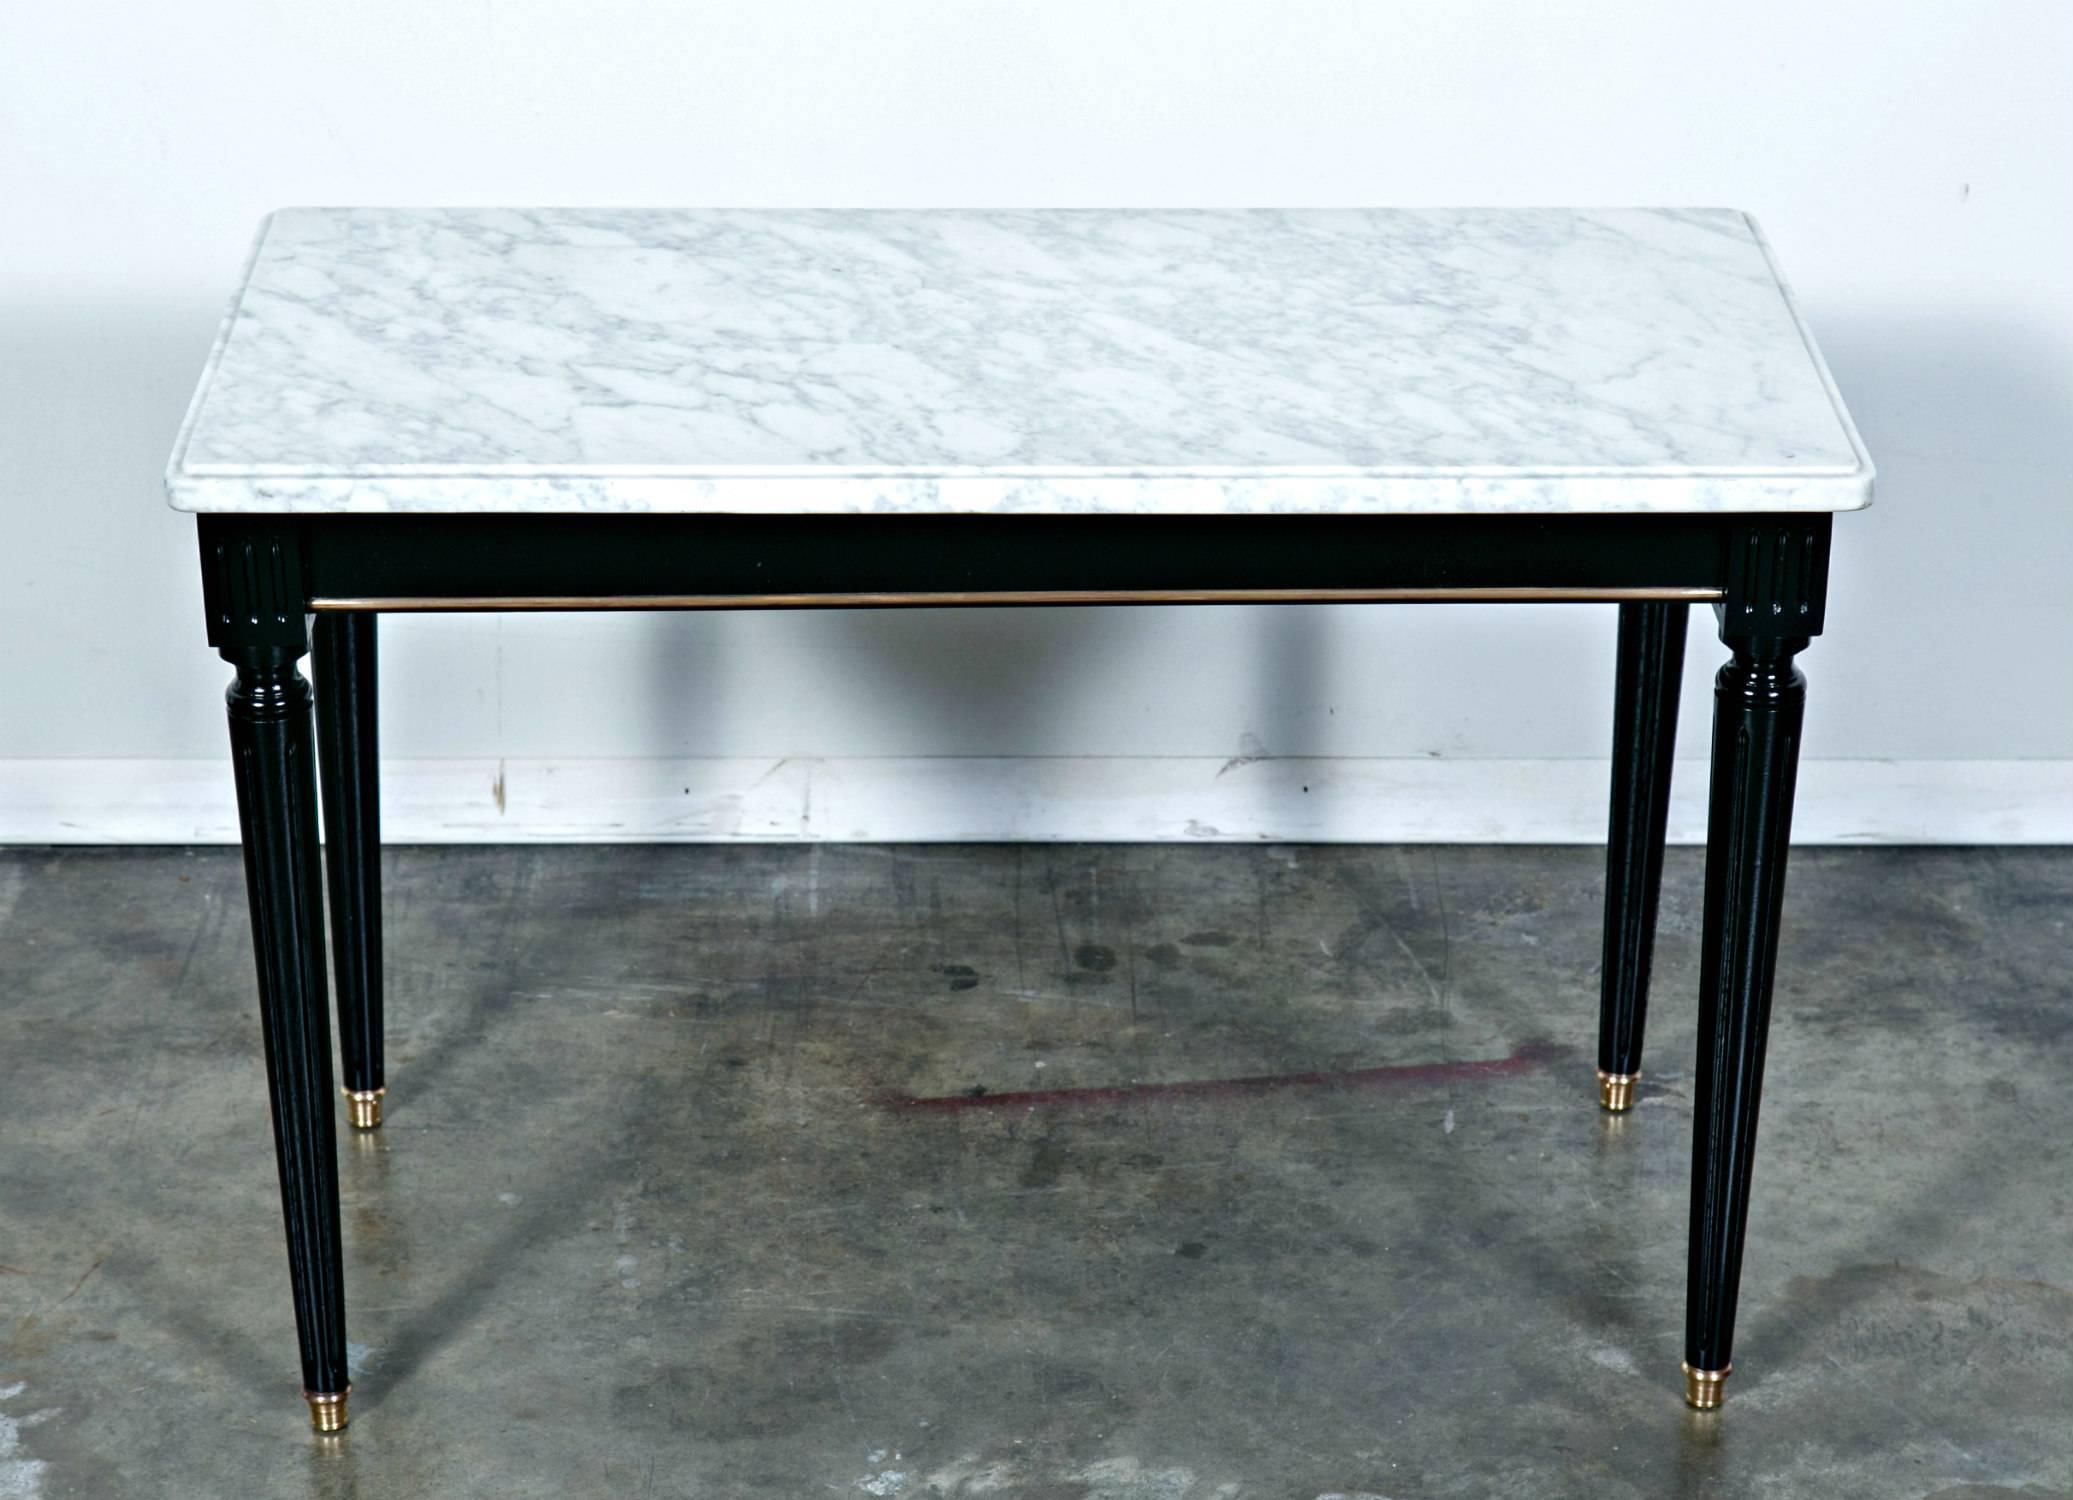 Classic French Louis XVI style coffee table in the manner of Maison Jansen, ebonized with a lustrous French polish, having brass trim and original Carrara marble top. Tapered, fluted legs ending in brass sabots. Mixes with other periods seamlessly.